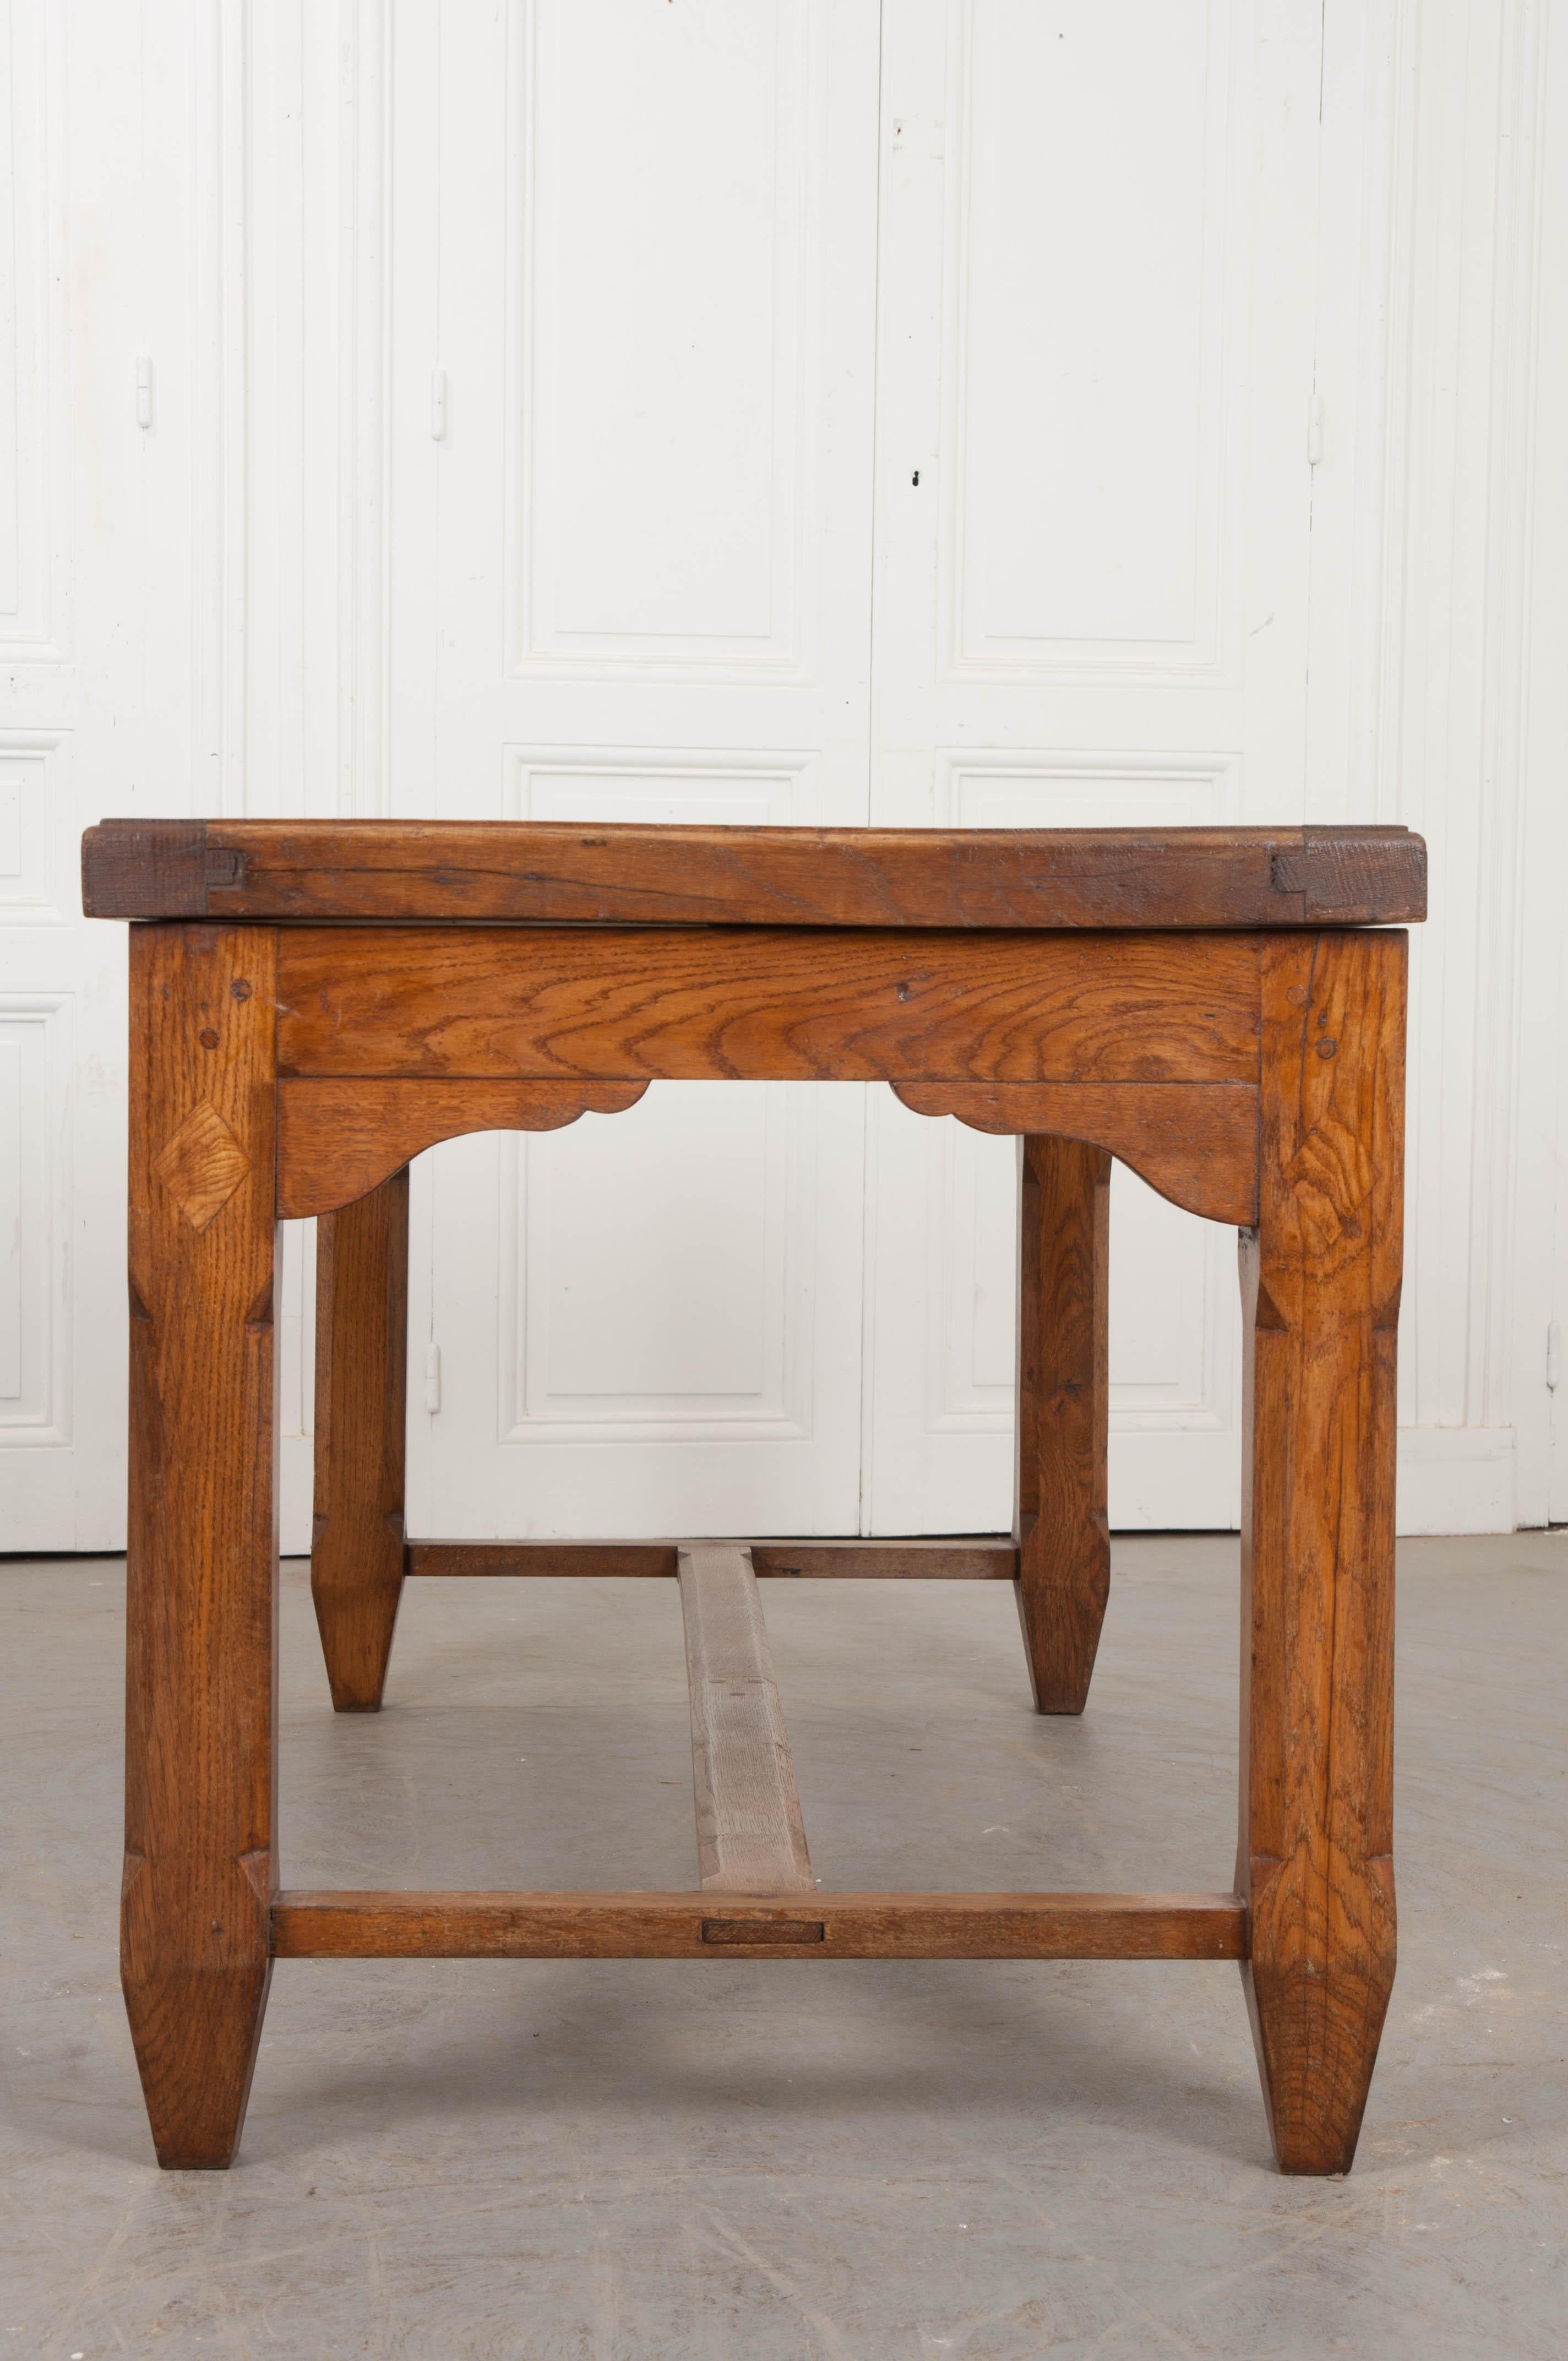 This unique and substantial oak refectory table, circa 1870s, was found in the French countryside. Of doweled and mortise-and-tenon construction, it features a triple-sectioned top of five horizontal planks separated by two vertical planks over